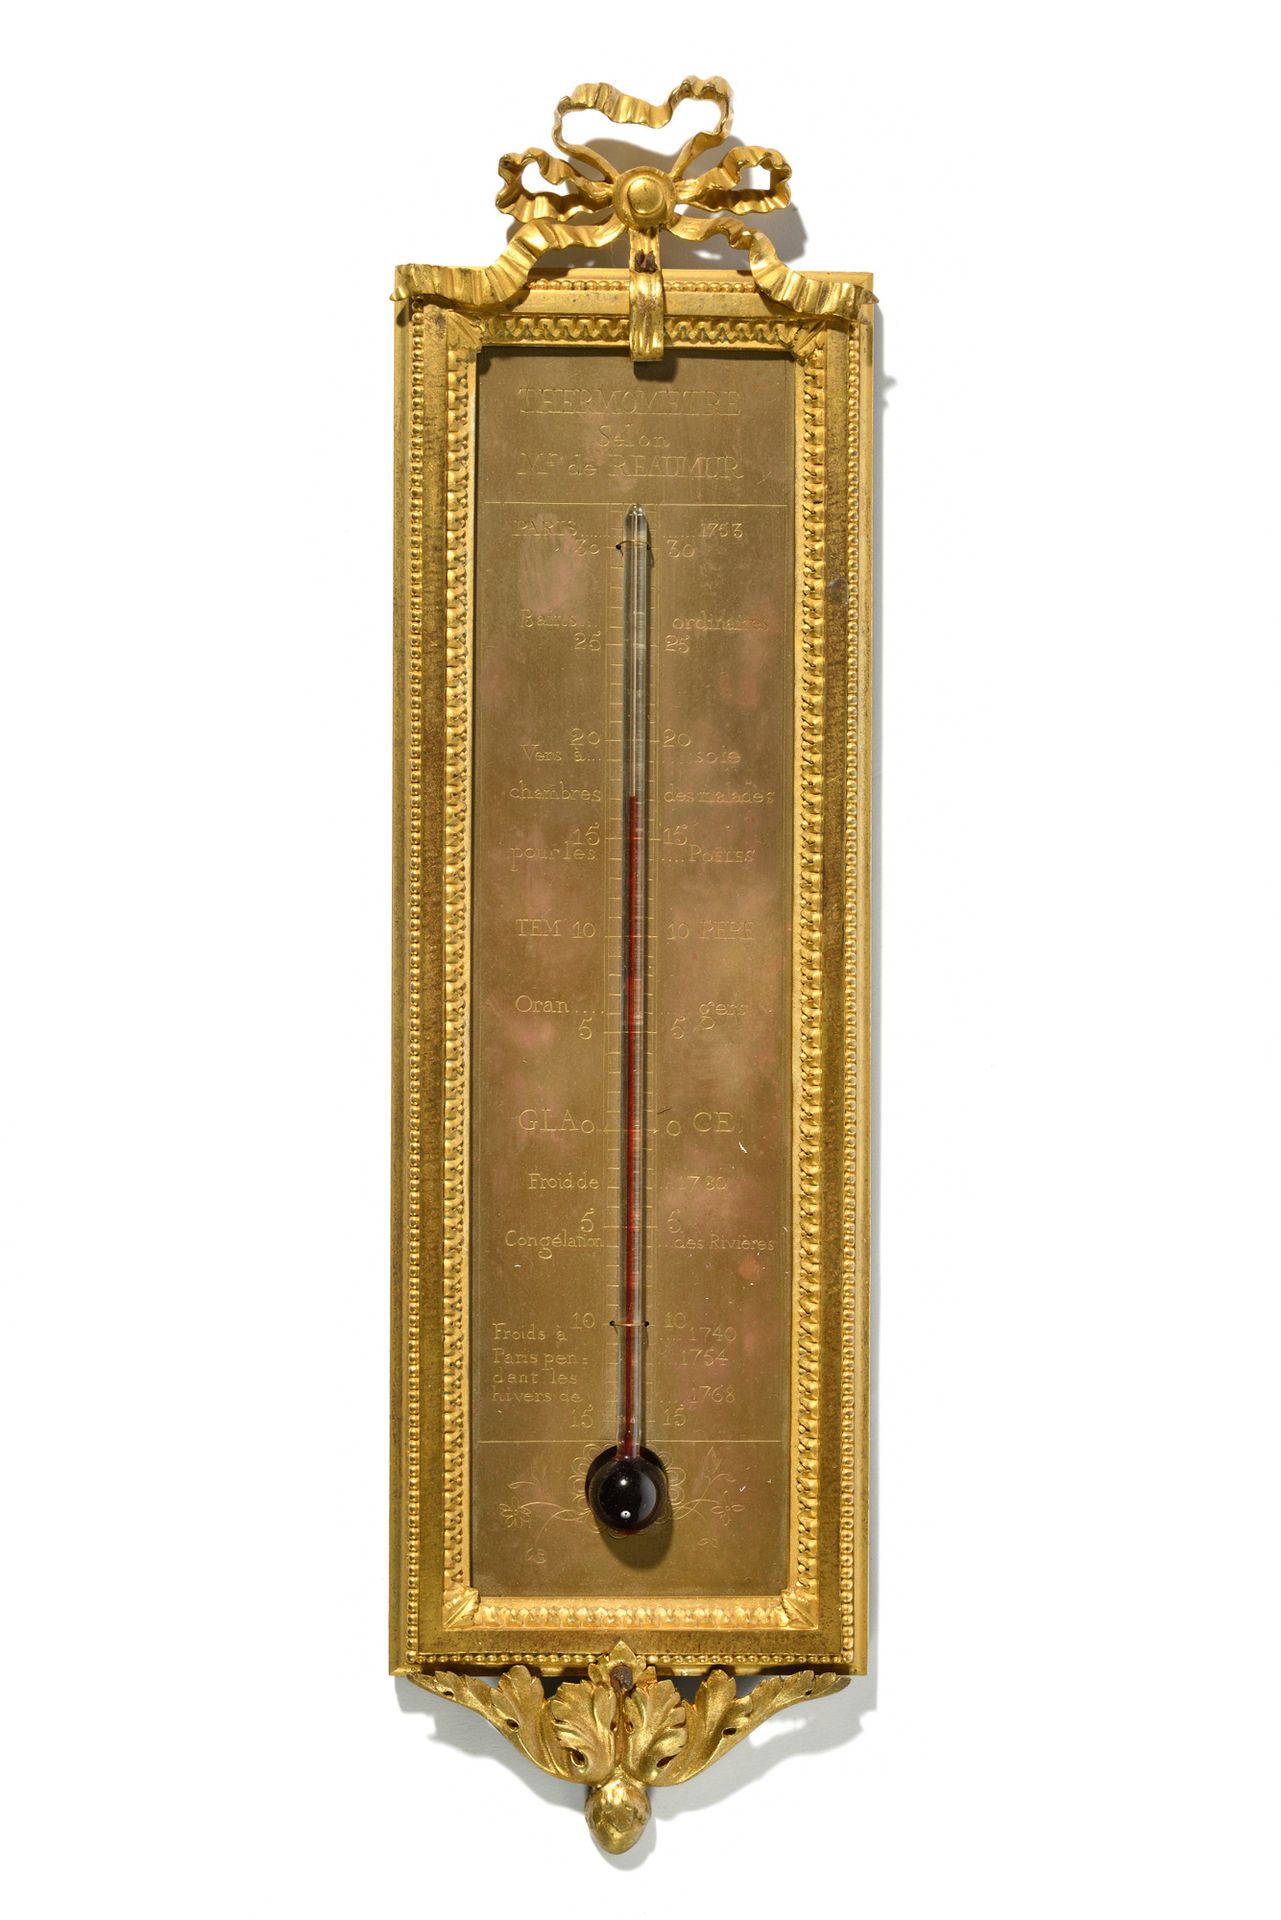 Null THERMOMETER in gilt bronze and engraved brass, the frame with friezes of gr&hellip;